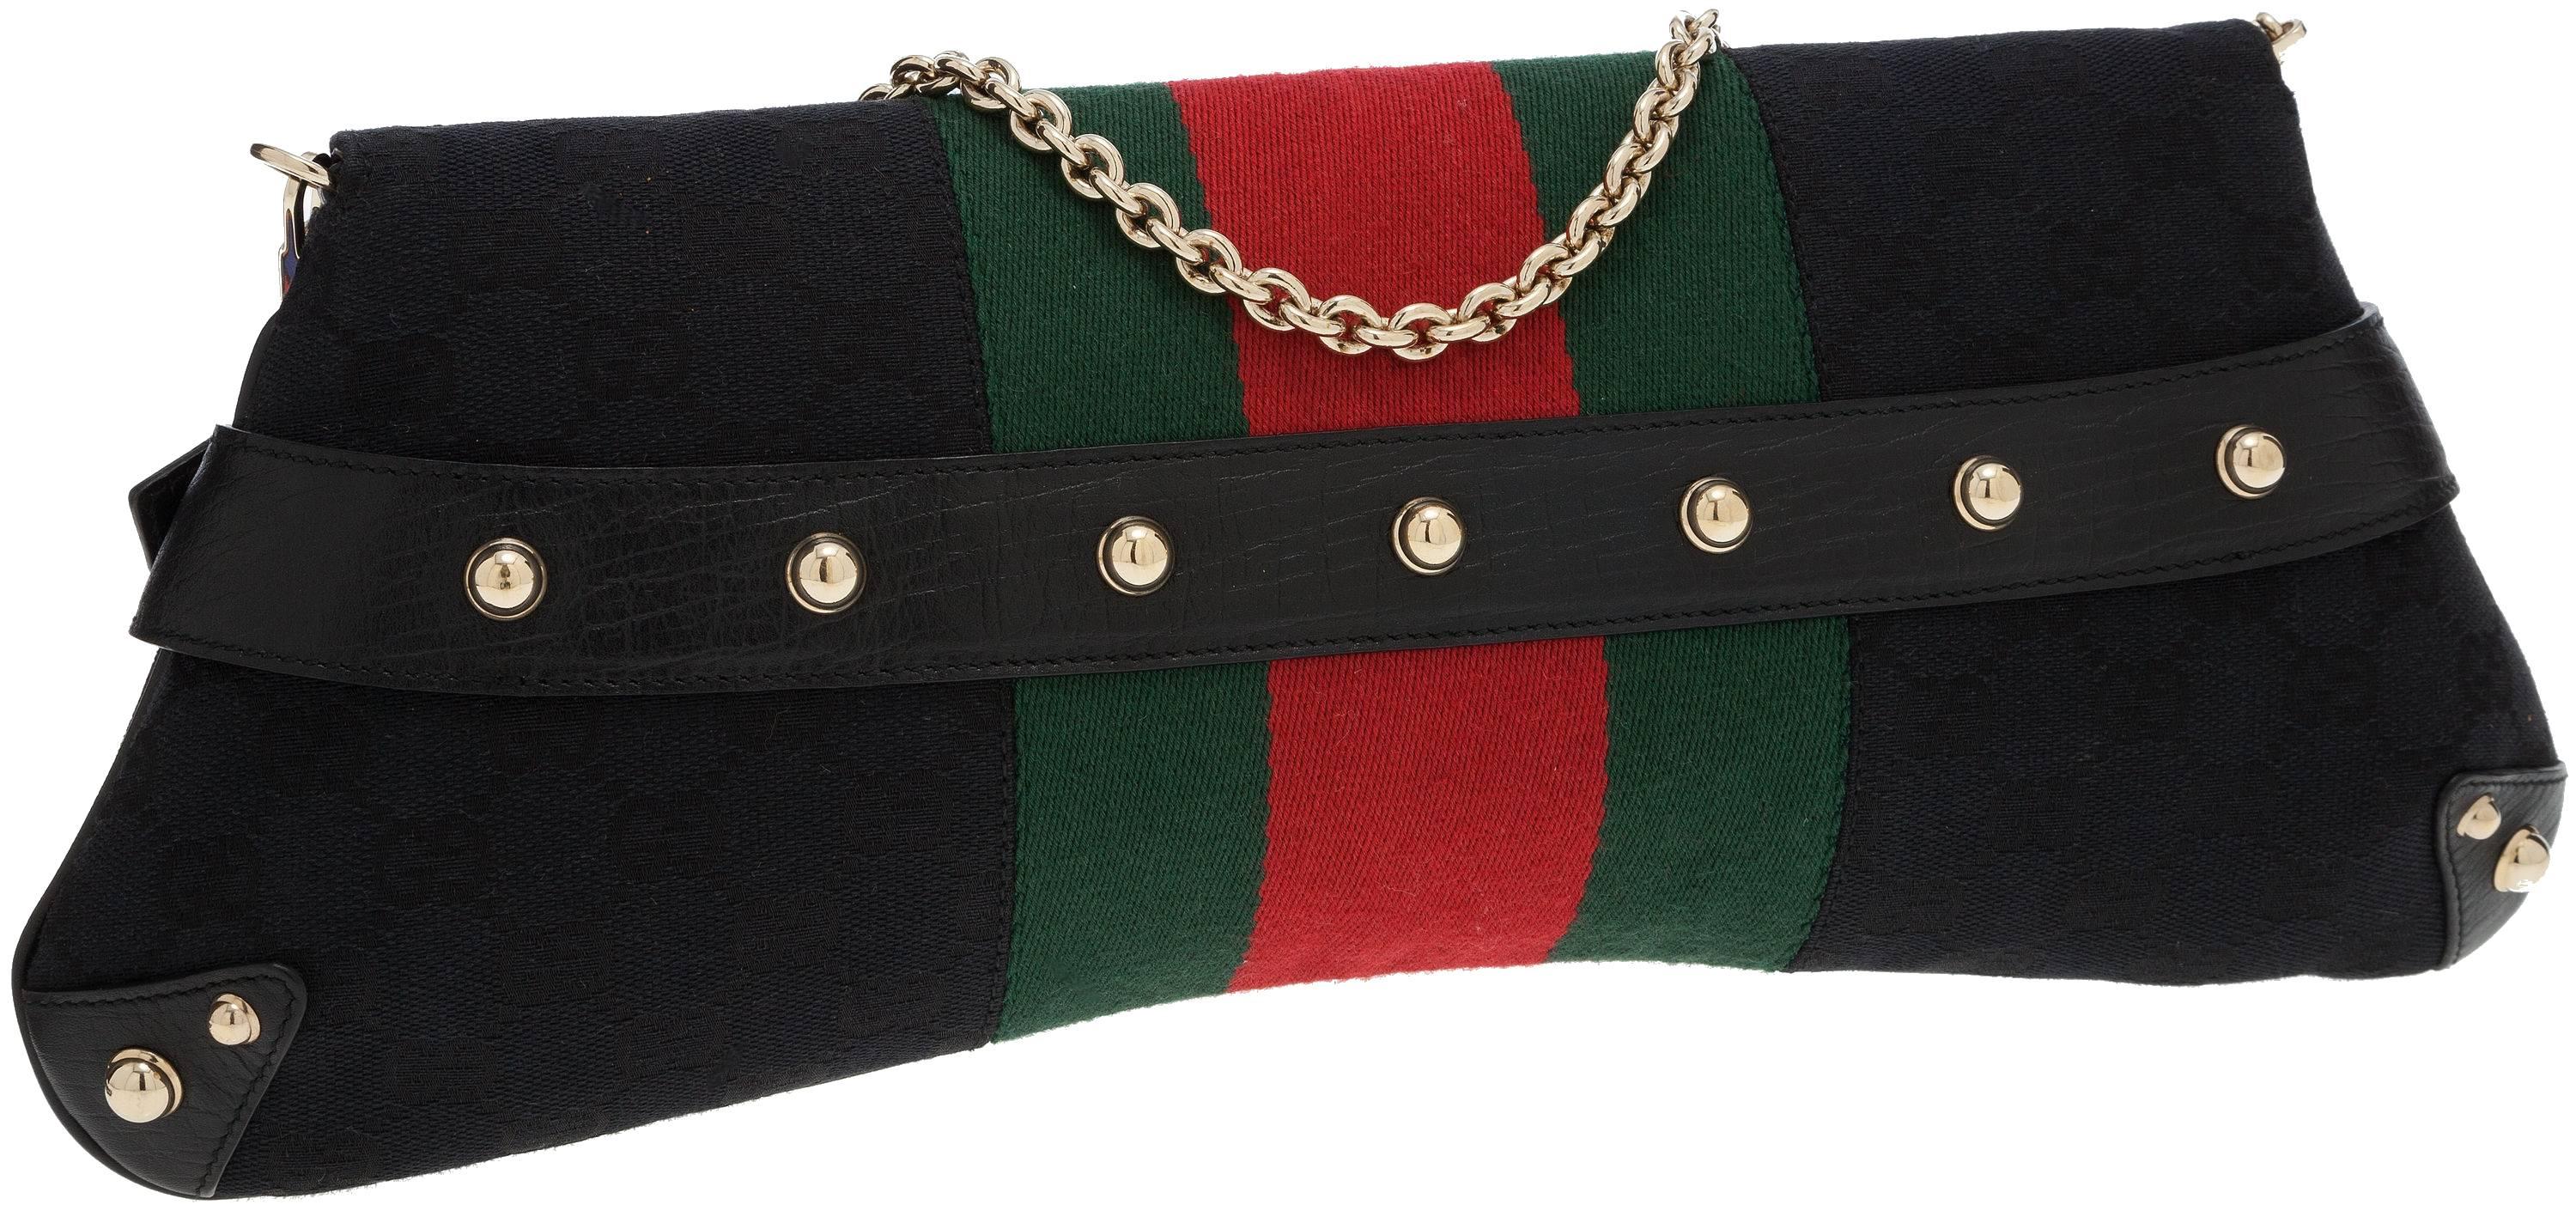 Stunning Gucci XL Black Monogram Canvas Striped Horsebit Clutch 
Golden hardware & Studs
Detachable chain strap
Snap closure
Fully lined
One slip pocket
Retails for 1939$
Comes with Gucci dustbag

